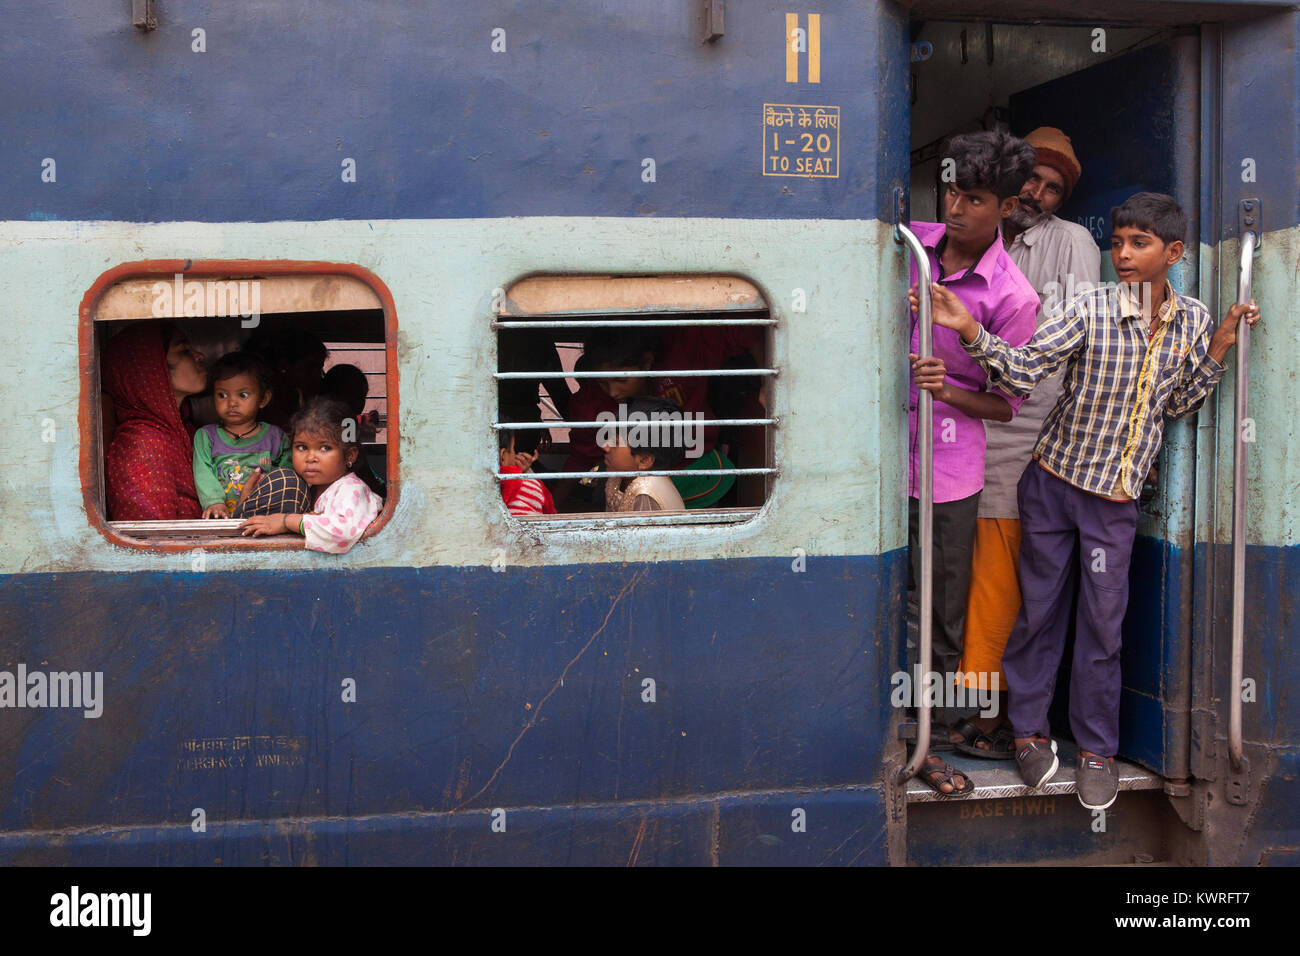 Passengers on an overcrowded train at Asansol railway station, India Stock Photo